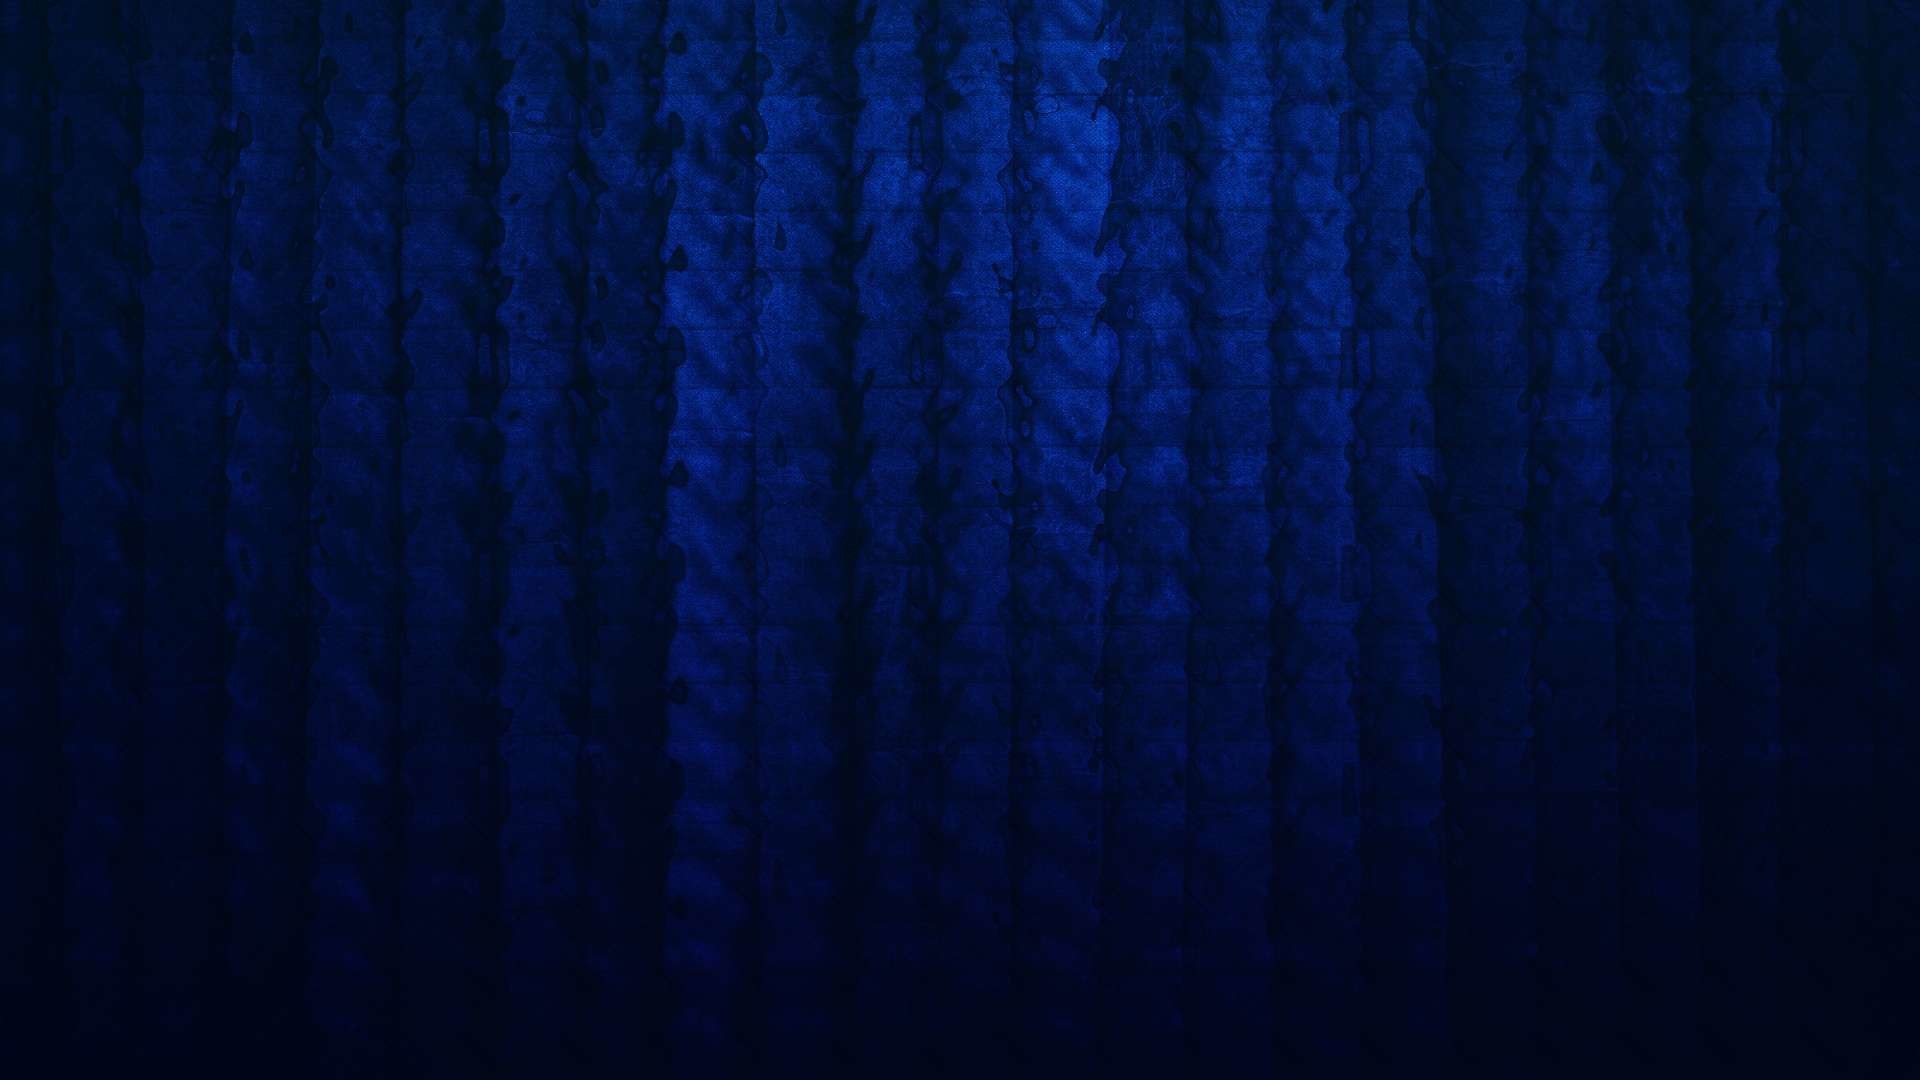 Dark Blue Hd Wallpapers (70+ Images)